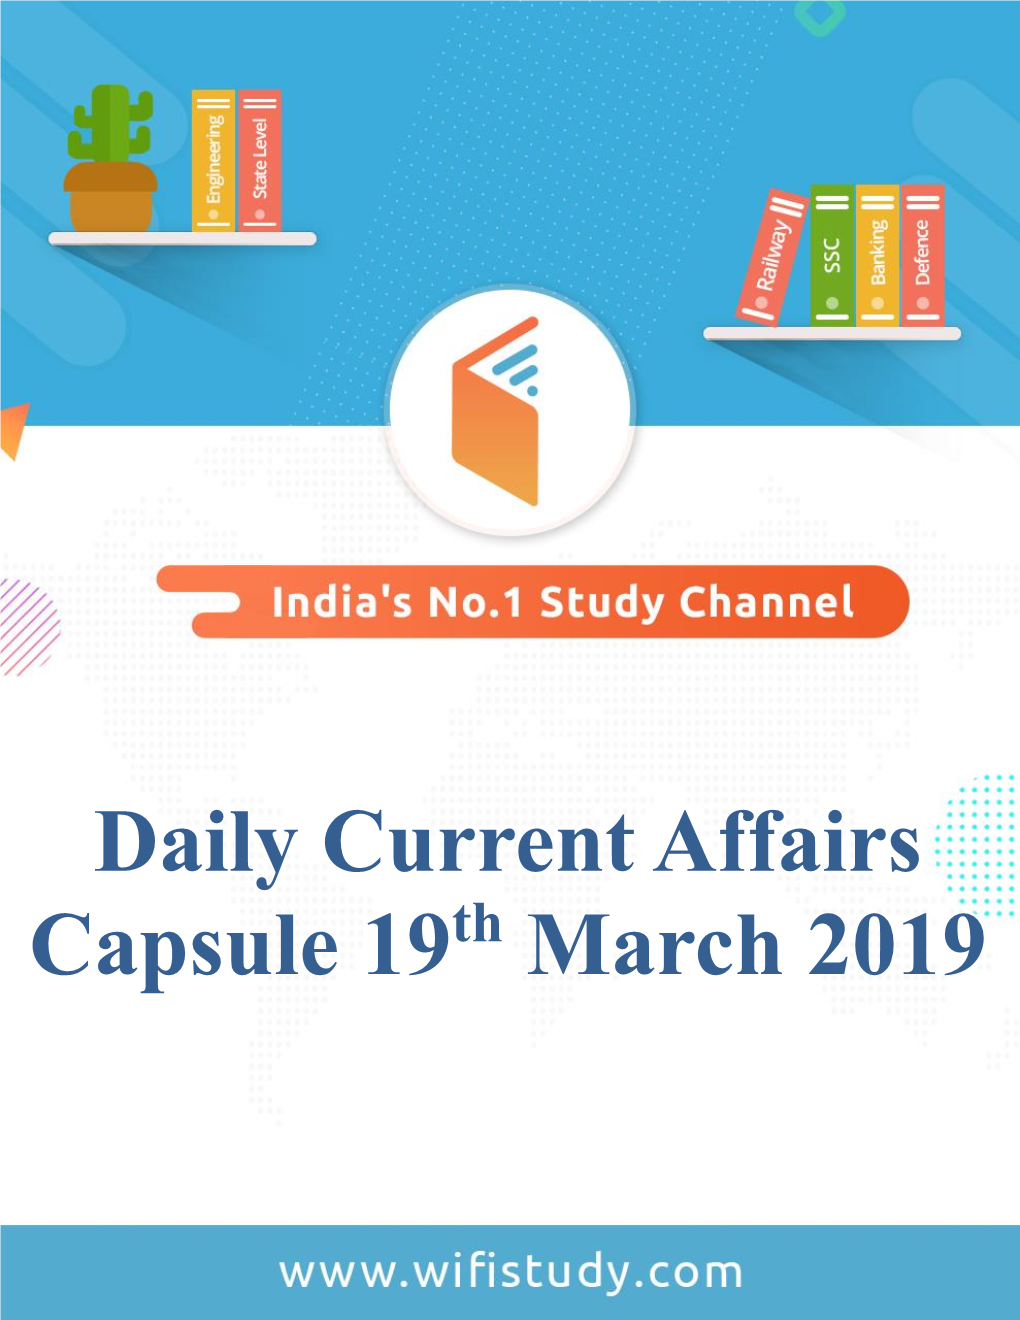 Daily Current Affairs Capsule 19 March 2019